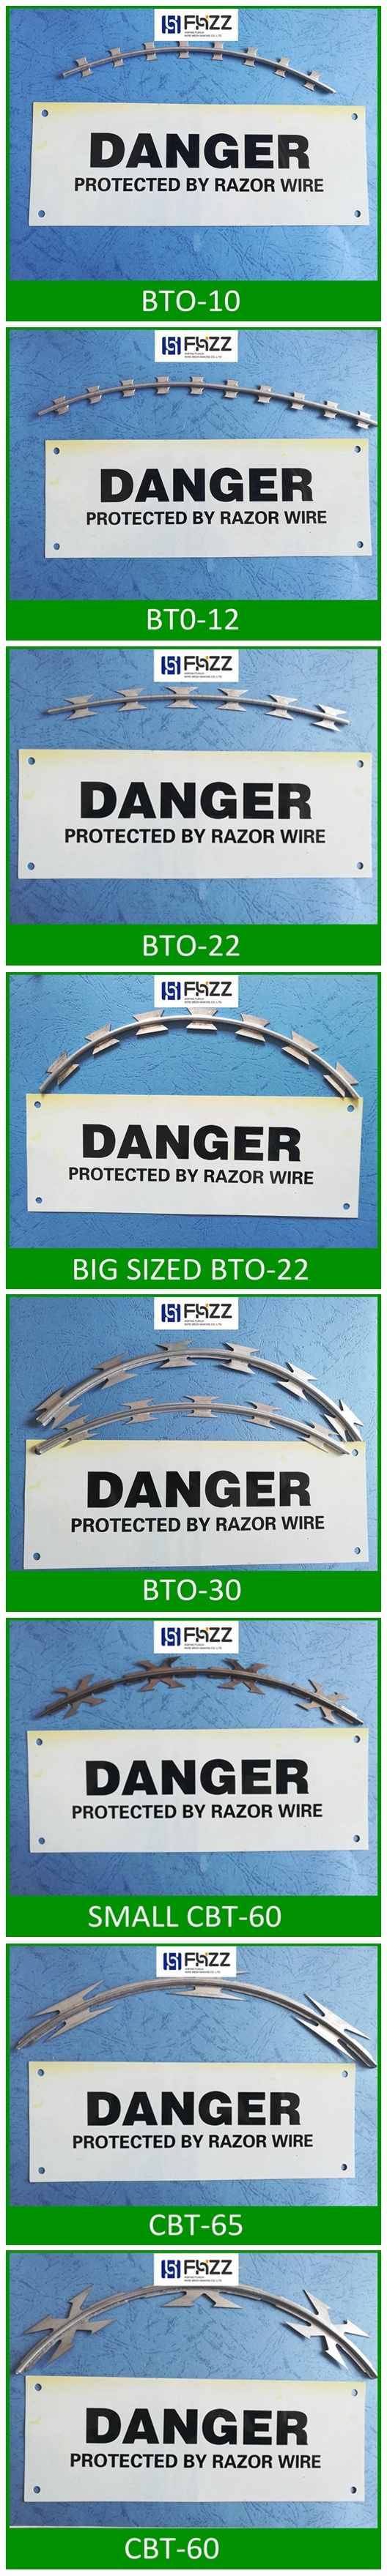 Bto -12 Barb Wire Fence for Military Service Area